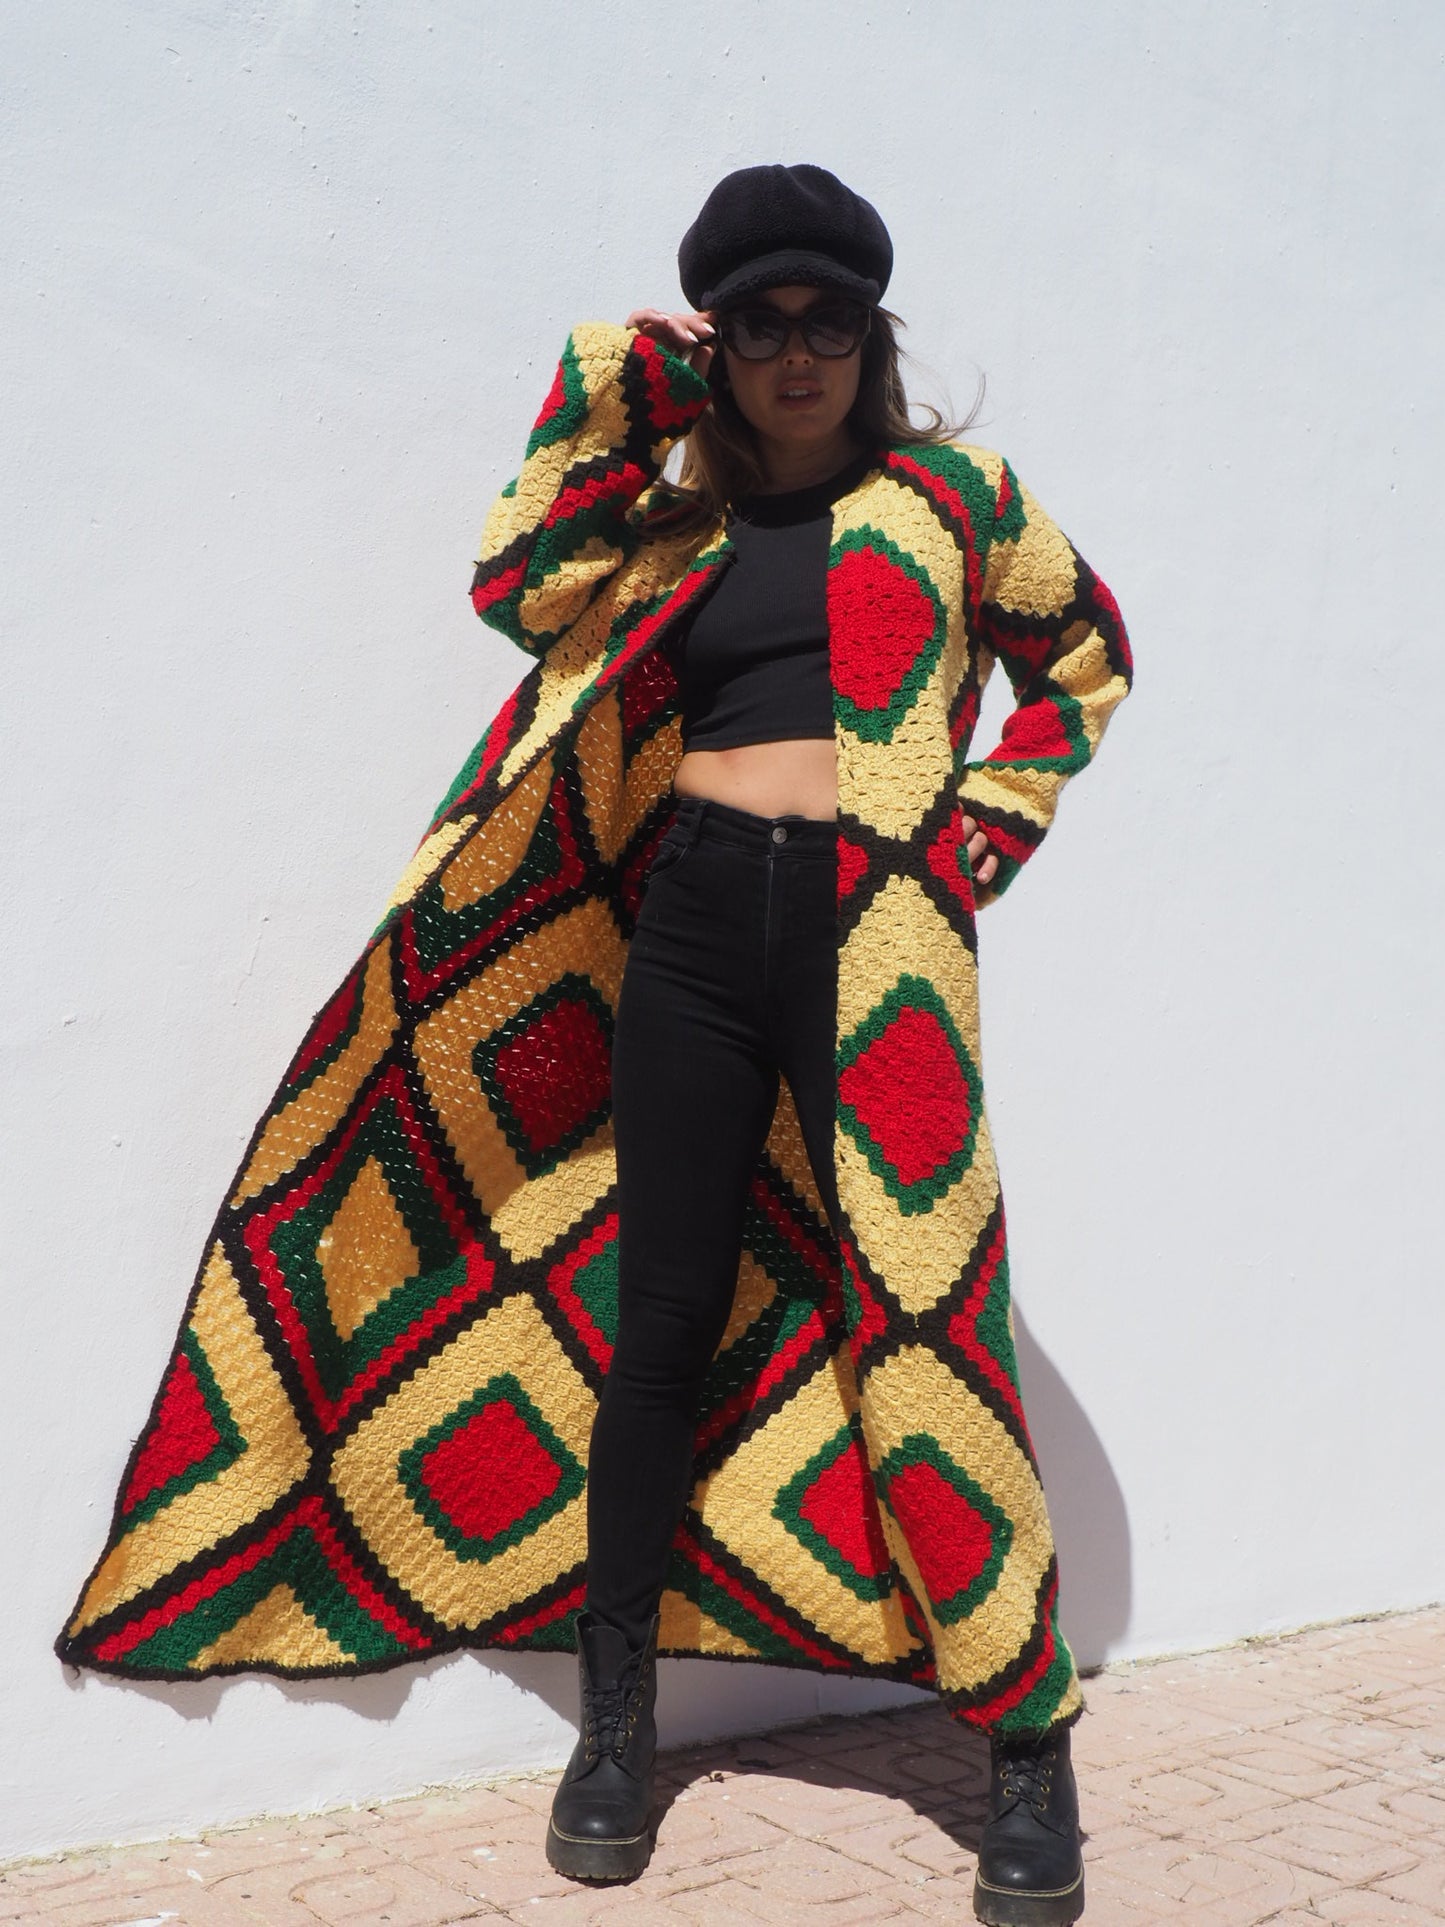 Very colourful handmade vintage crochet jacket by up-cycled by Vagabond Ibiza.